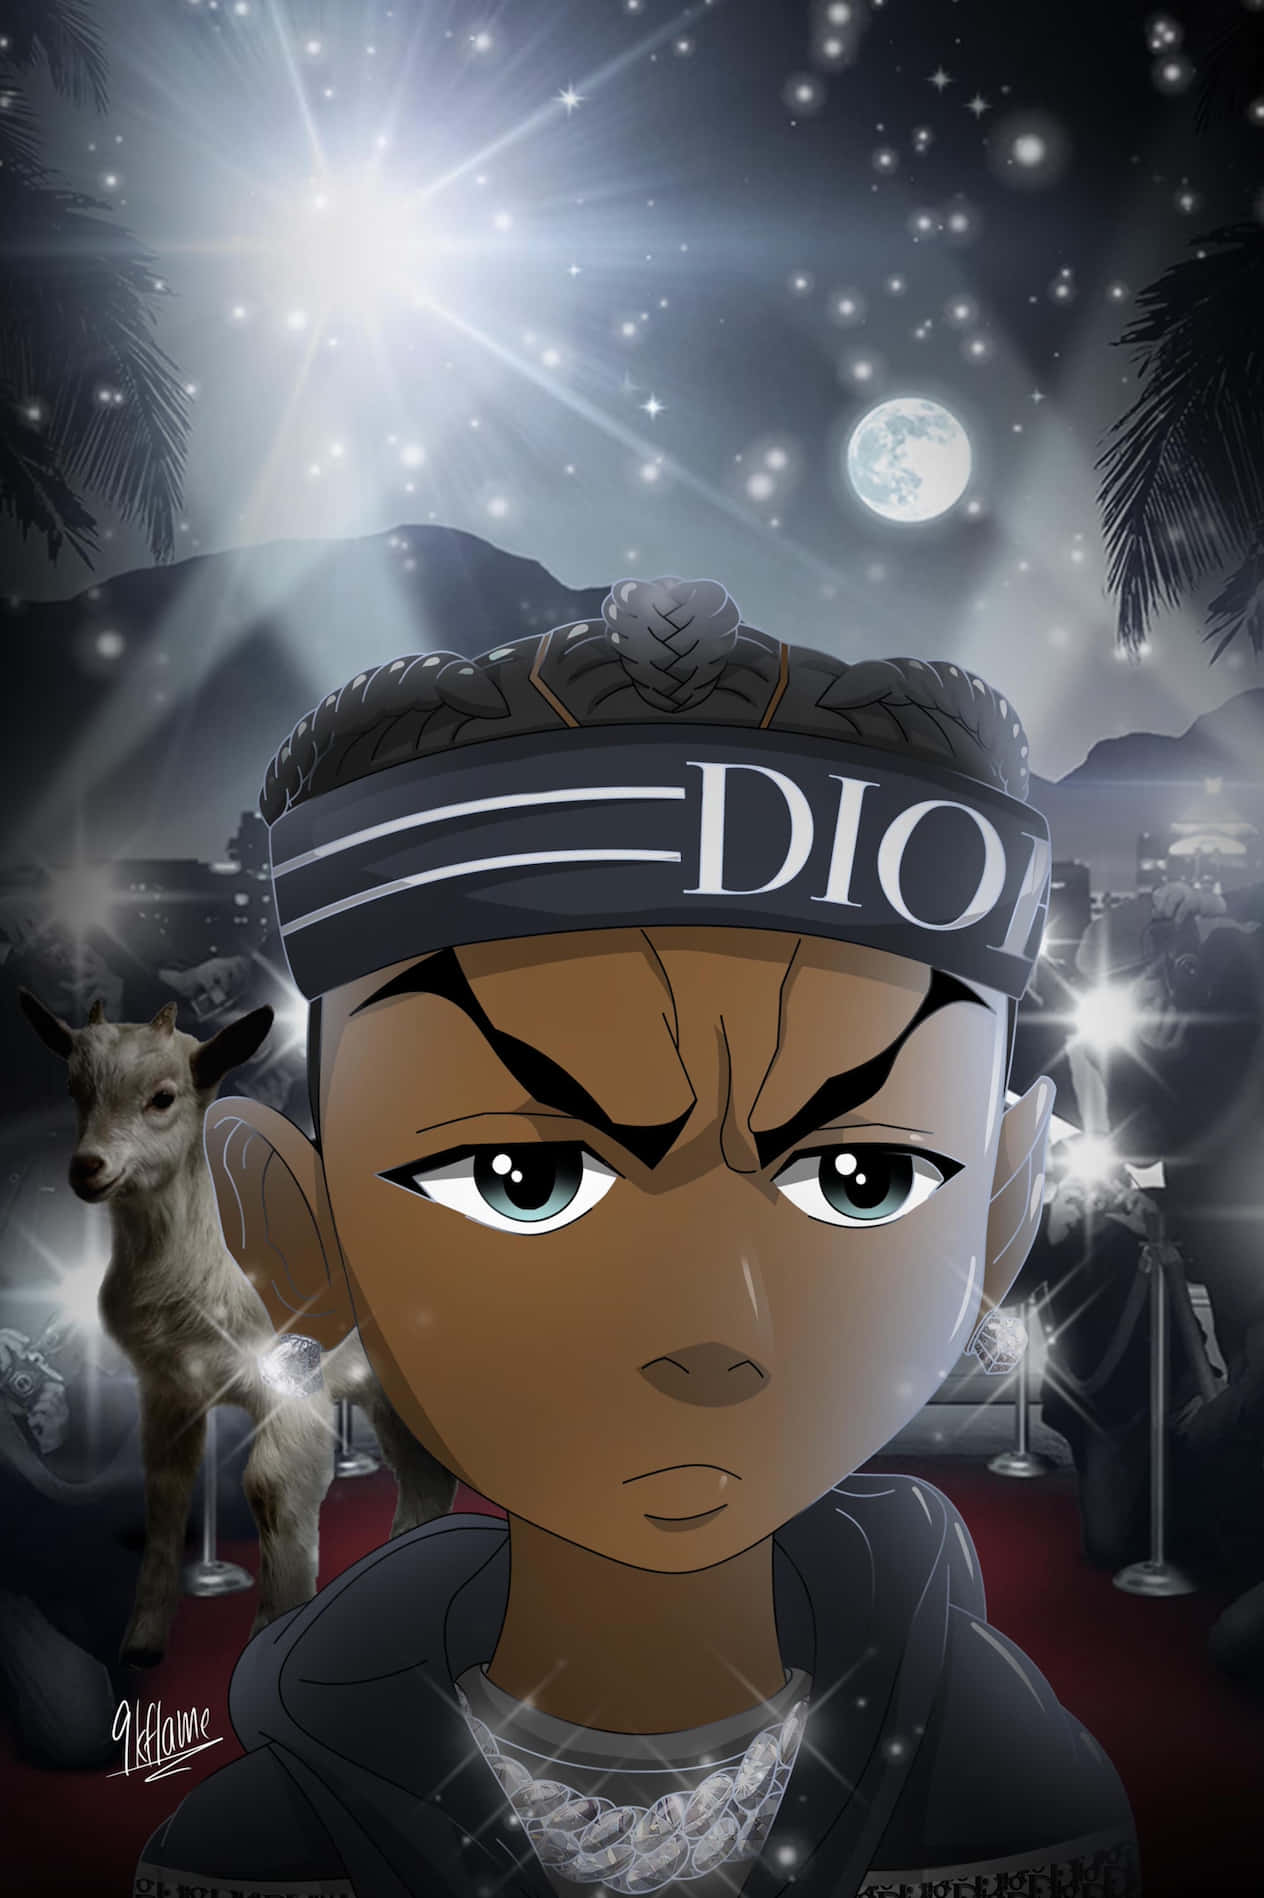 Download Lil Baby Cartoon With Dior Headband Wallpaper | Wallpapers.com